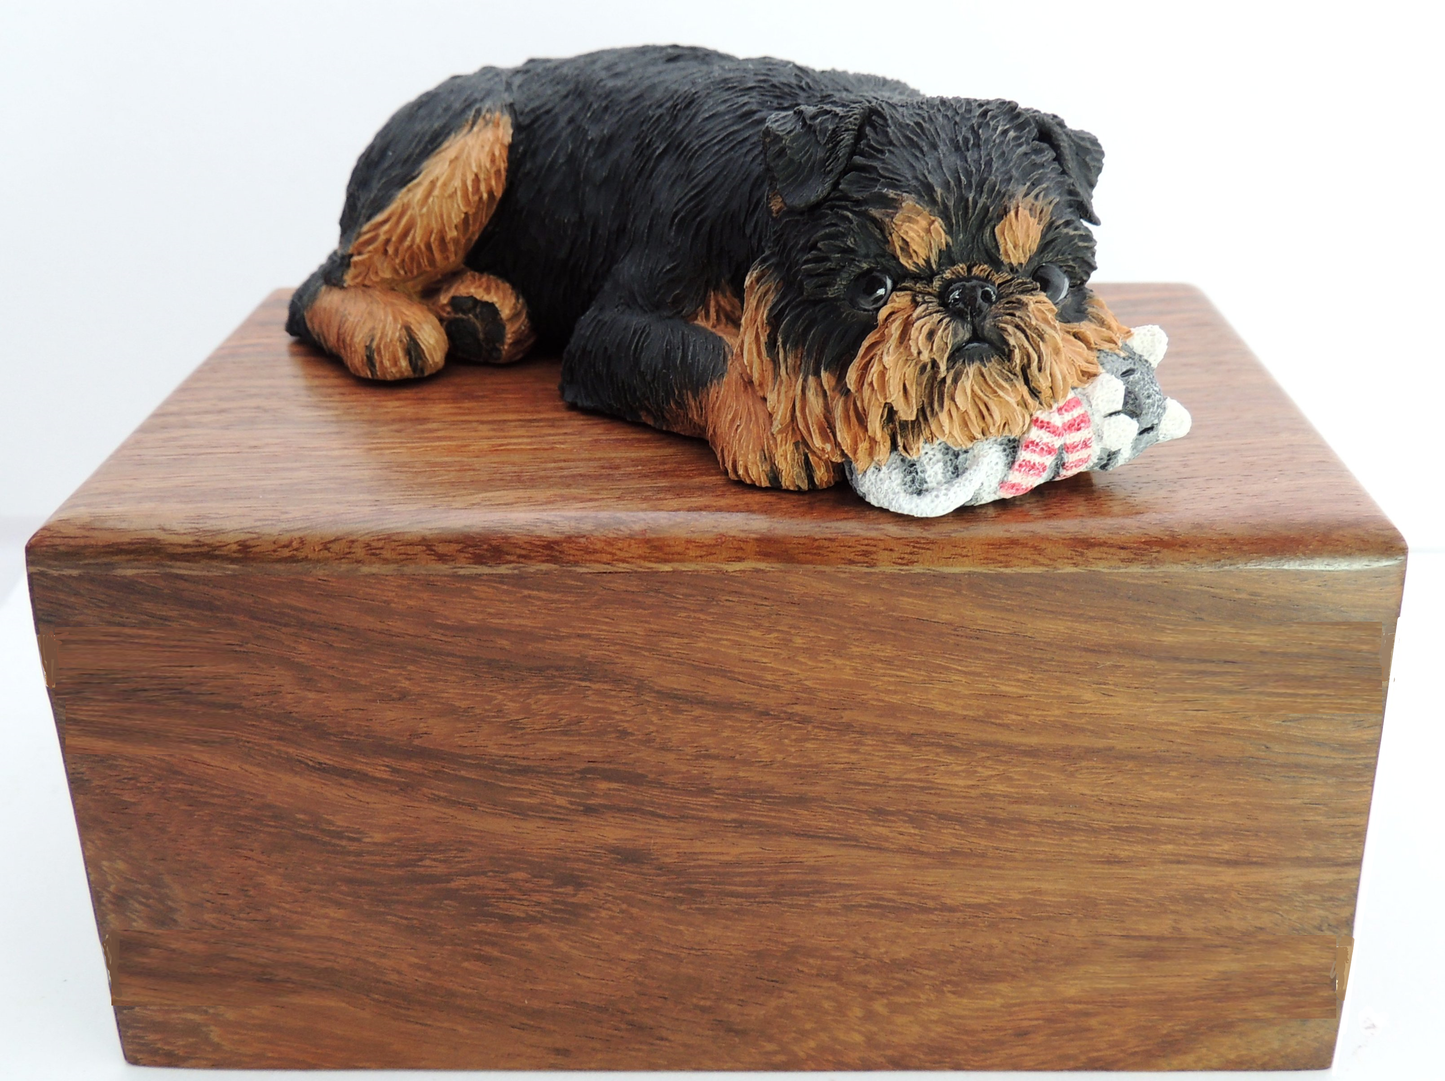 Griffon Bruxellois wood Cremation Urn For Pet Ashes